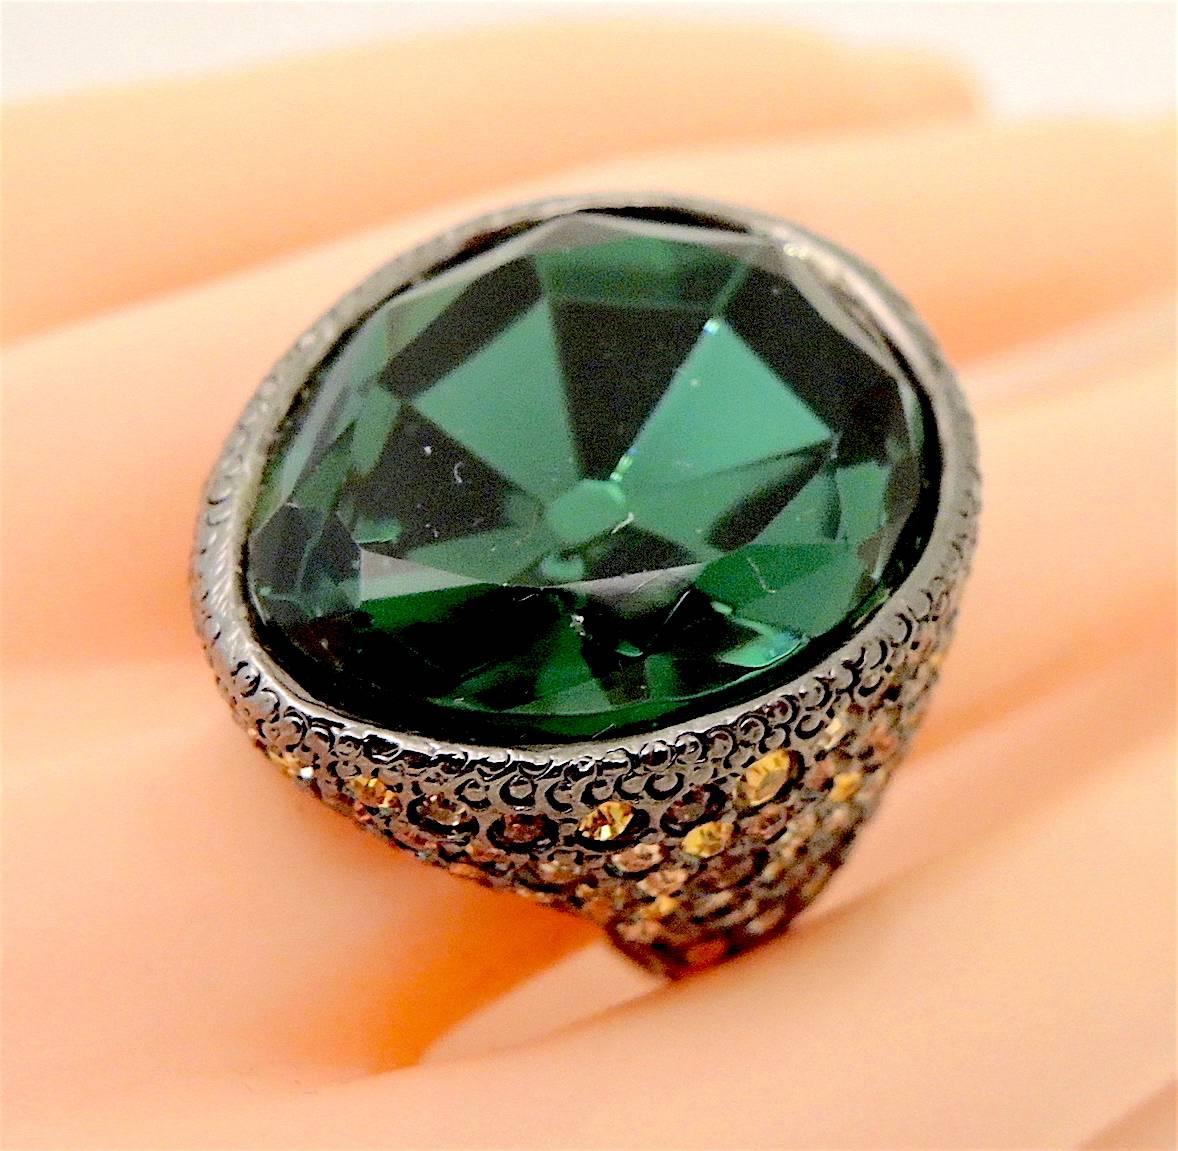 This huge Kenneth Jay Lane ring is a statement maker.  It has a large faceted emerald green crystal center. There are multiple shades of orange crystals on the side. It is set in gunmetal finish and measures 1-1/4” x 1”.  It is adjustable up to a